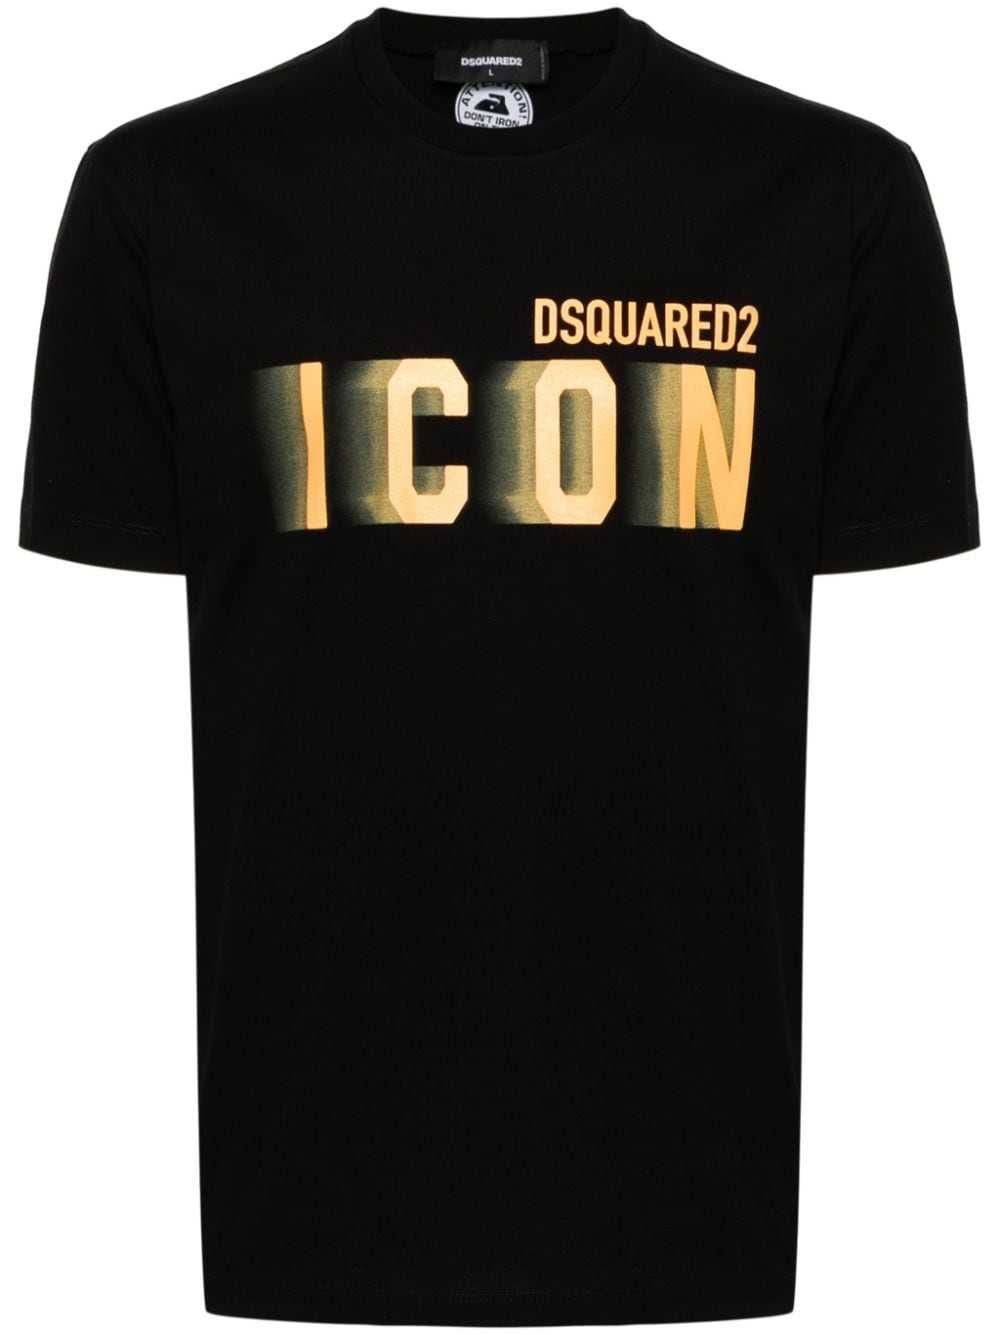 Dsquared2 t-shirt Gradient Icon Tee Black-Yellow roz. L 100% ORYGINAL